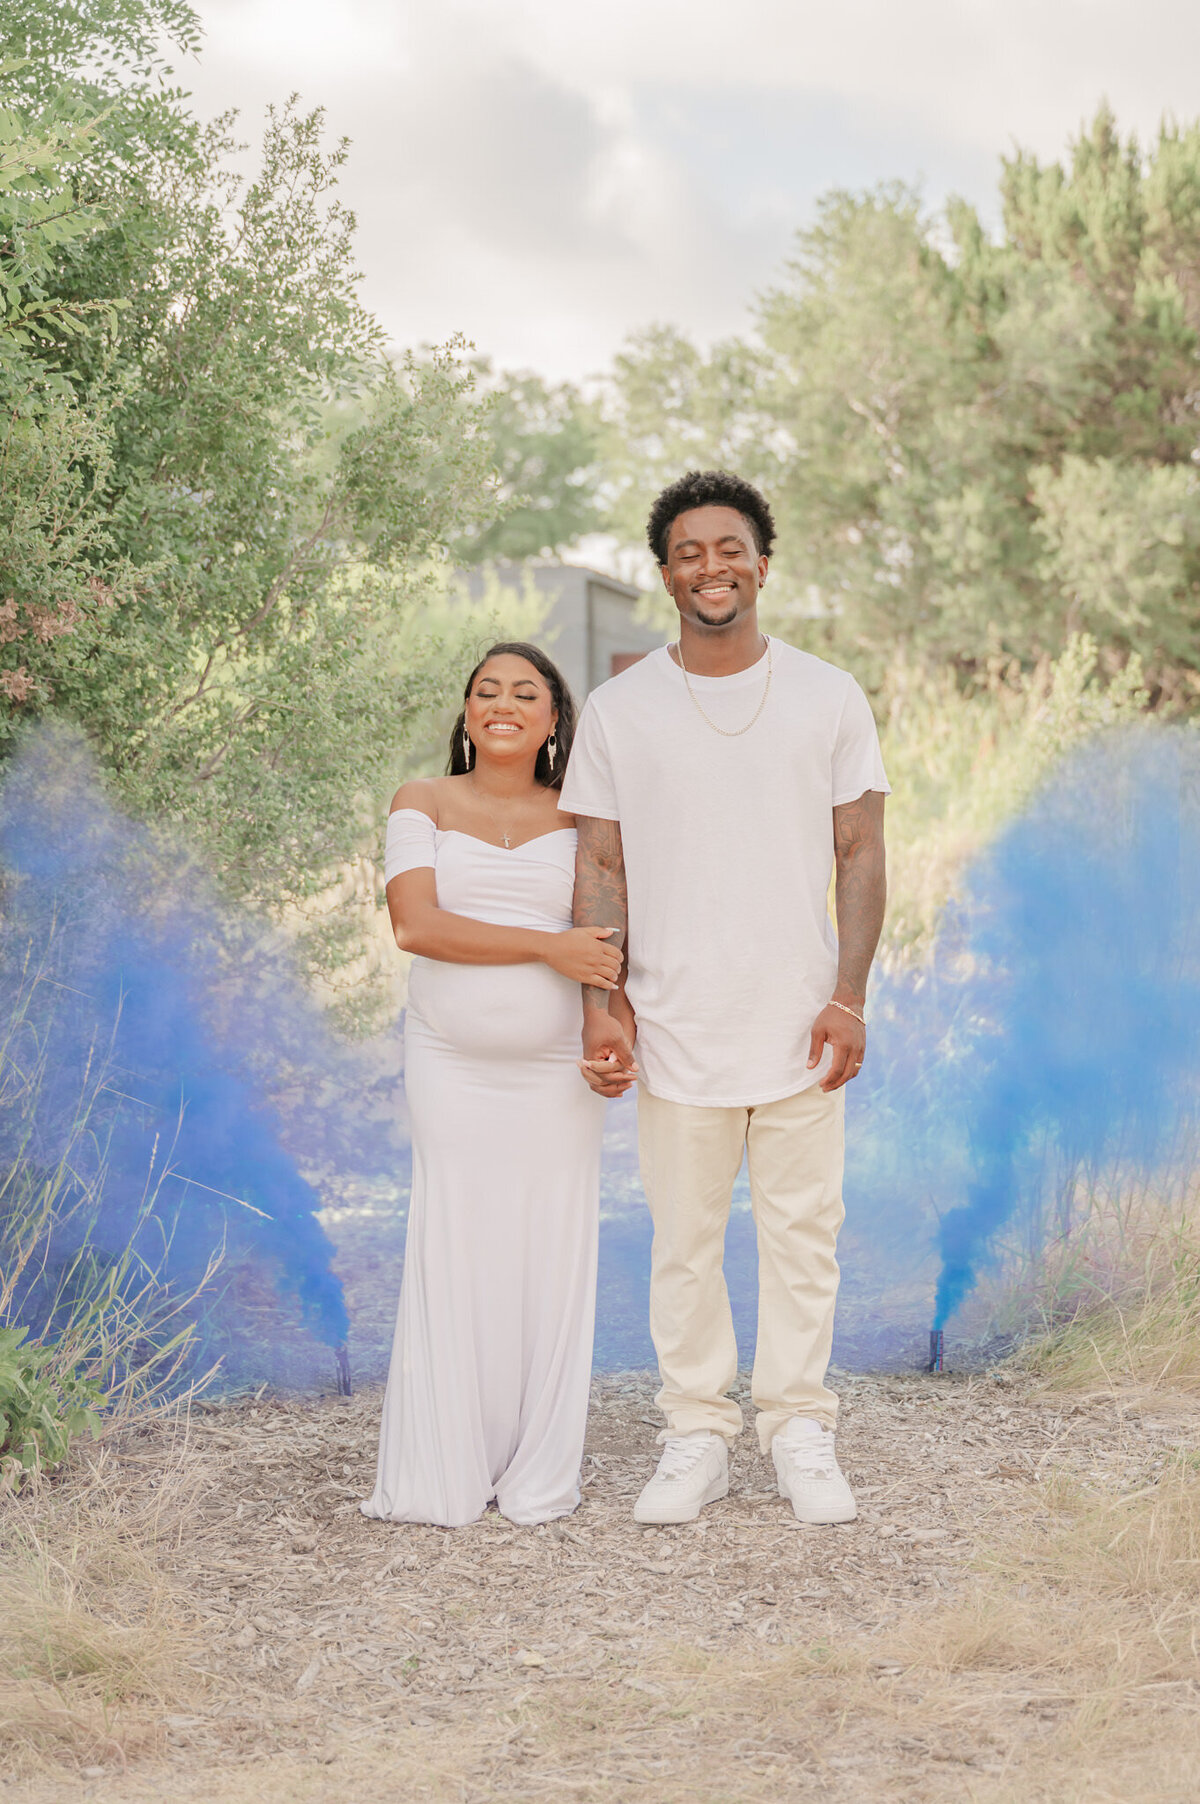 Couple in white stands with eyes closed as blue gender reveal smoke goes off behind them during maternity photos.